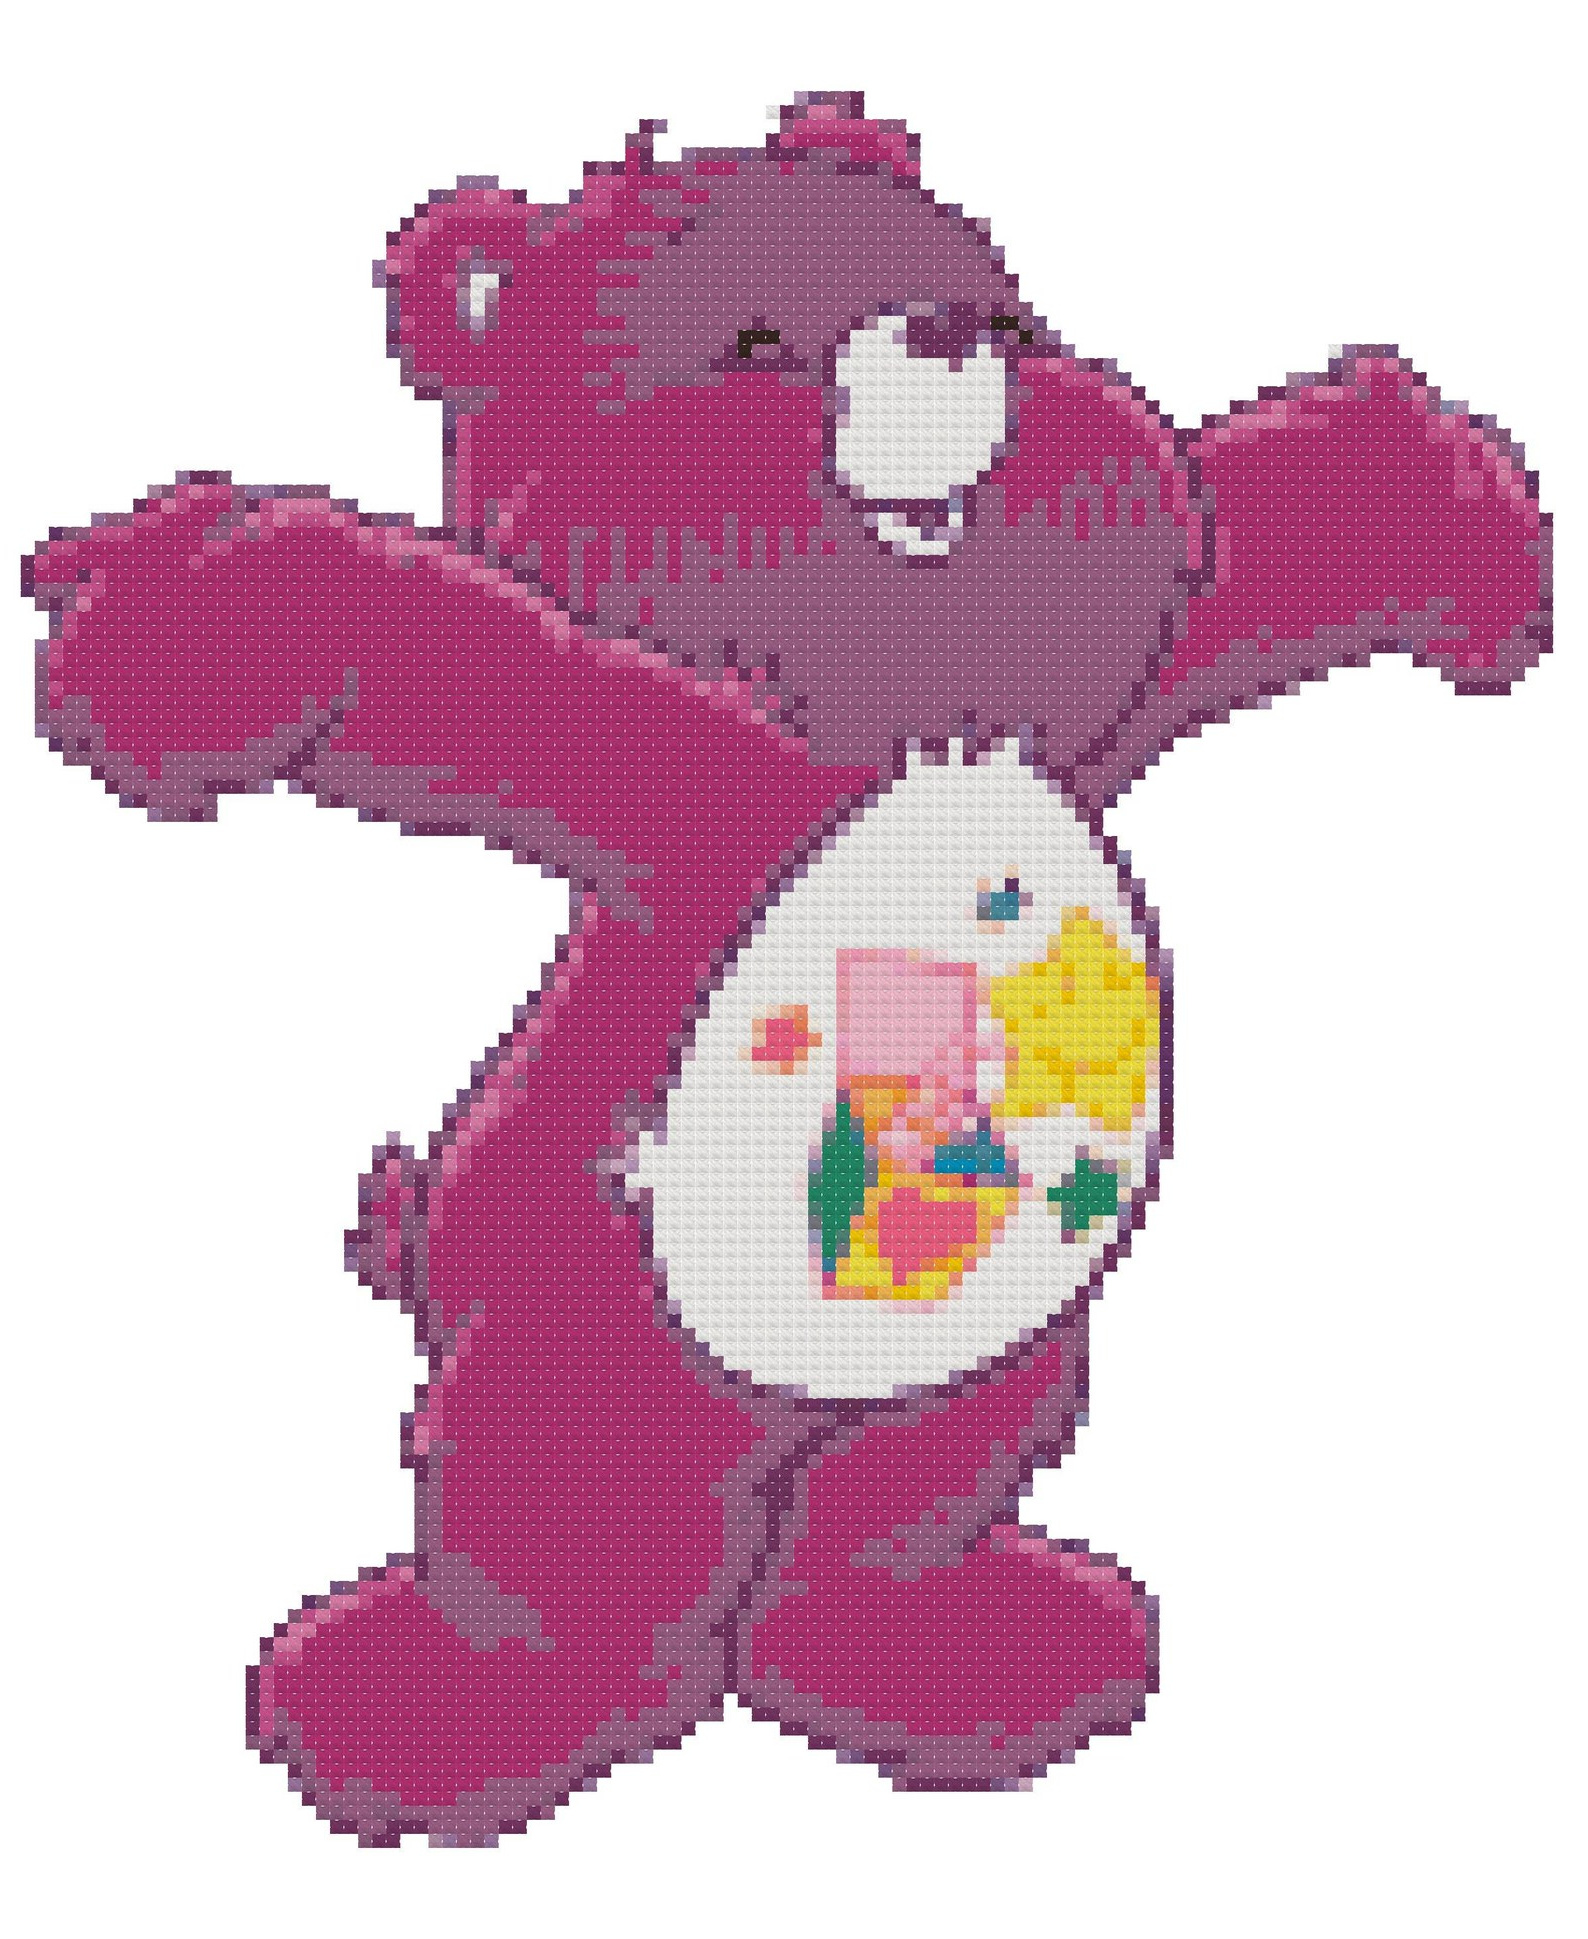 surprise bear cross stitch pattern pdf ga order=most relevant&ga search type=all&ga view type=gallery&ga search query=surprise bear&referring page type=market